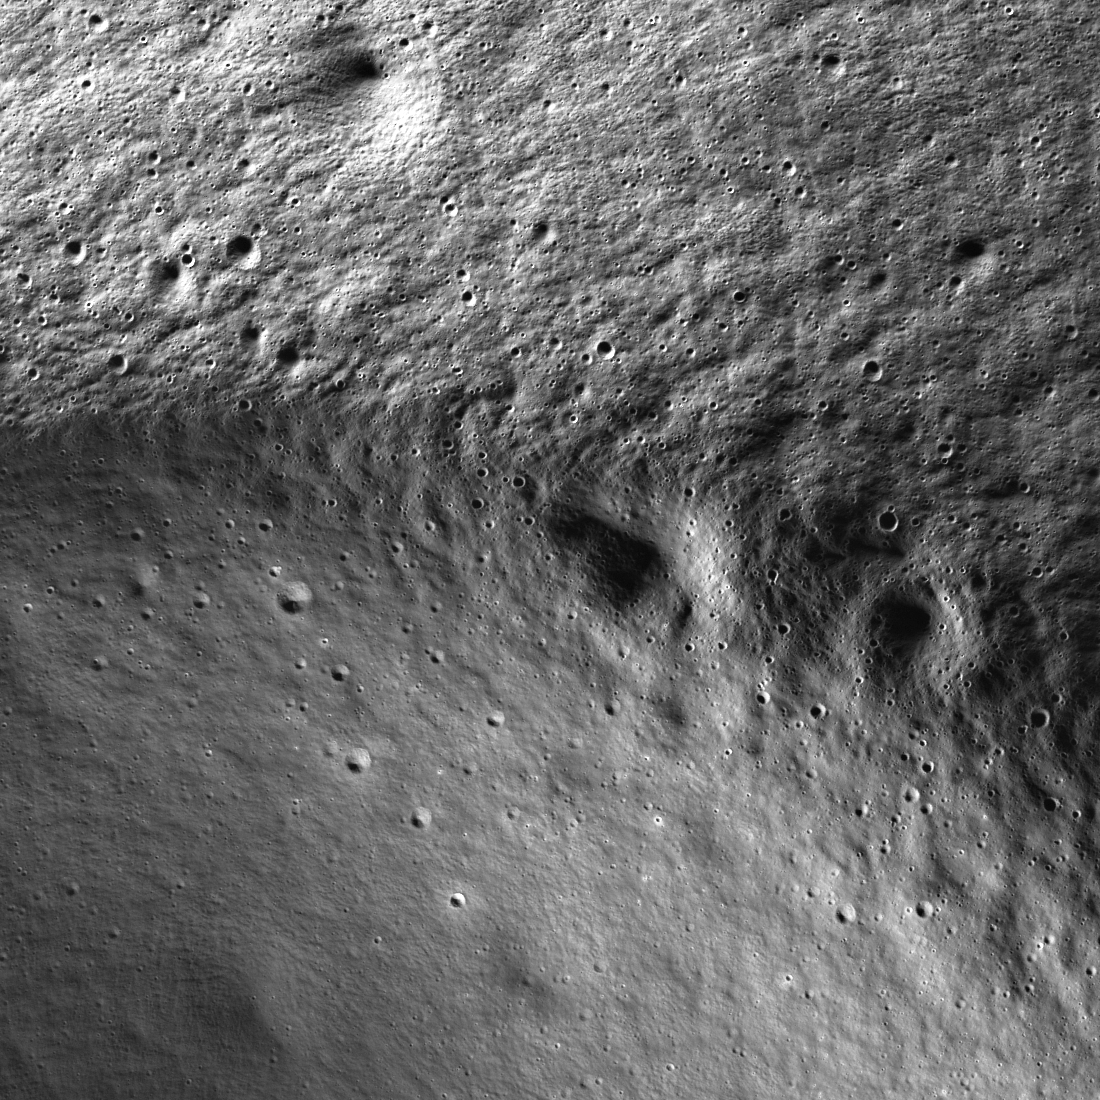 Rim of Marvin crater